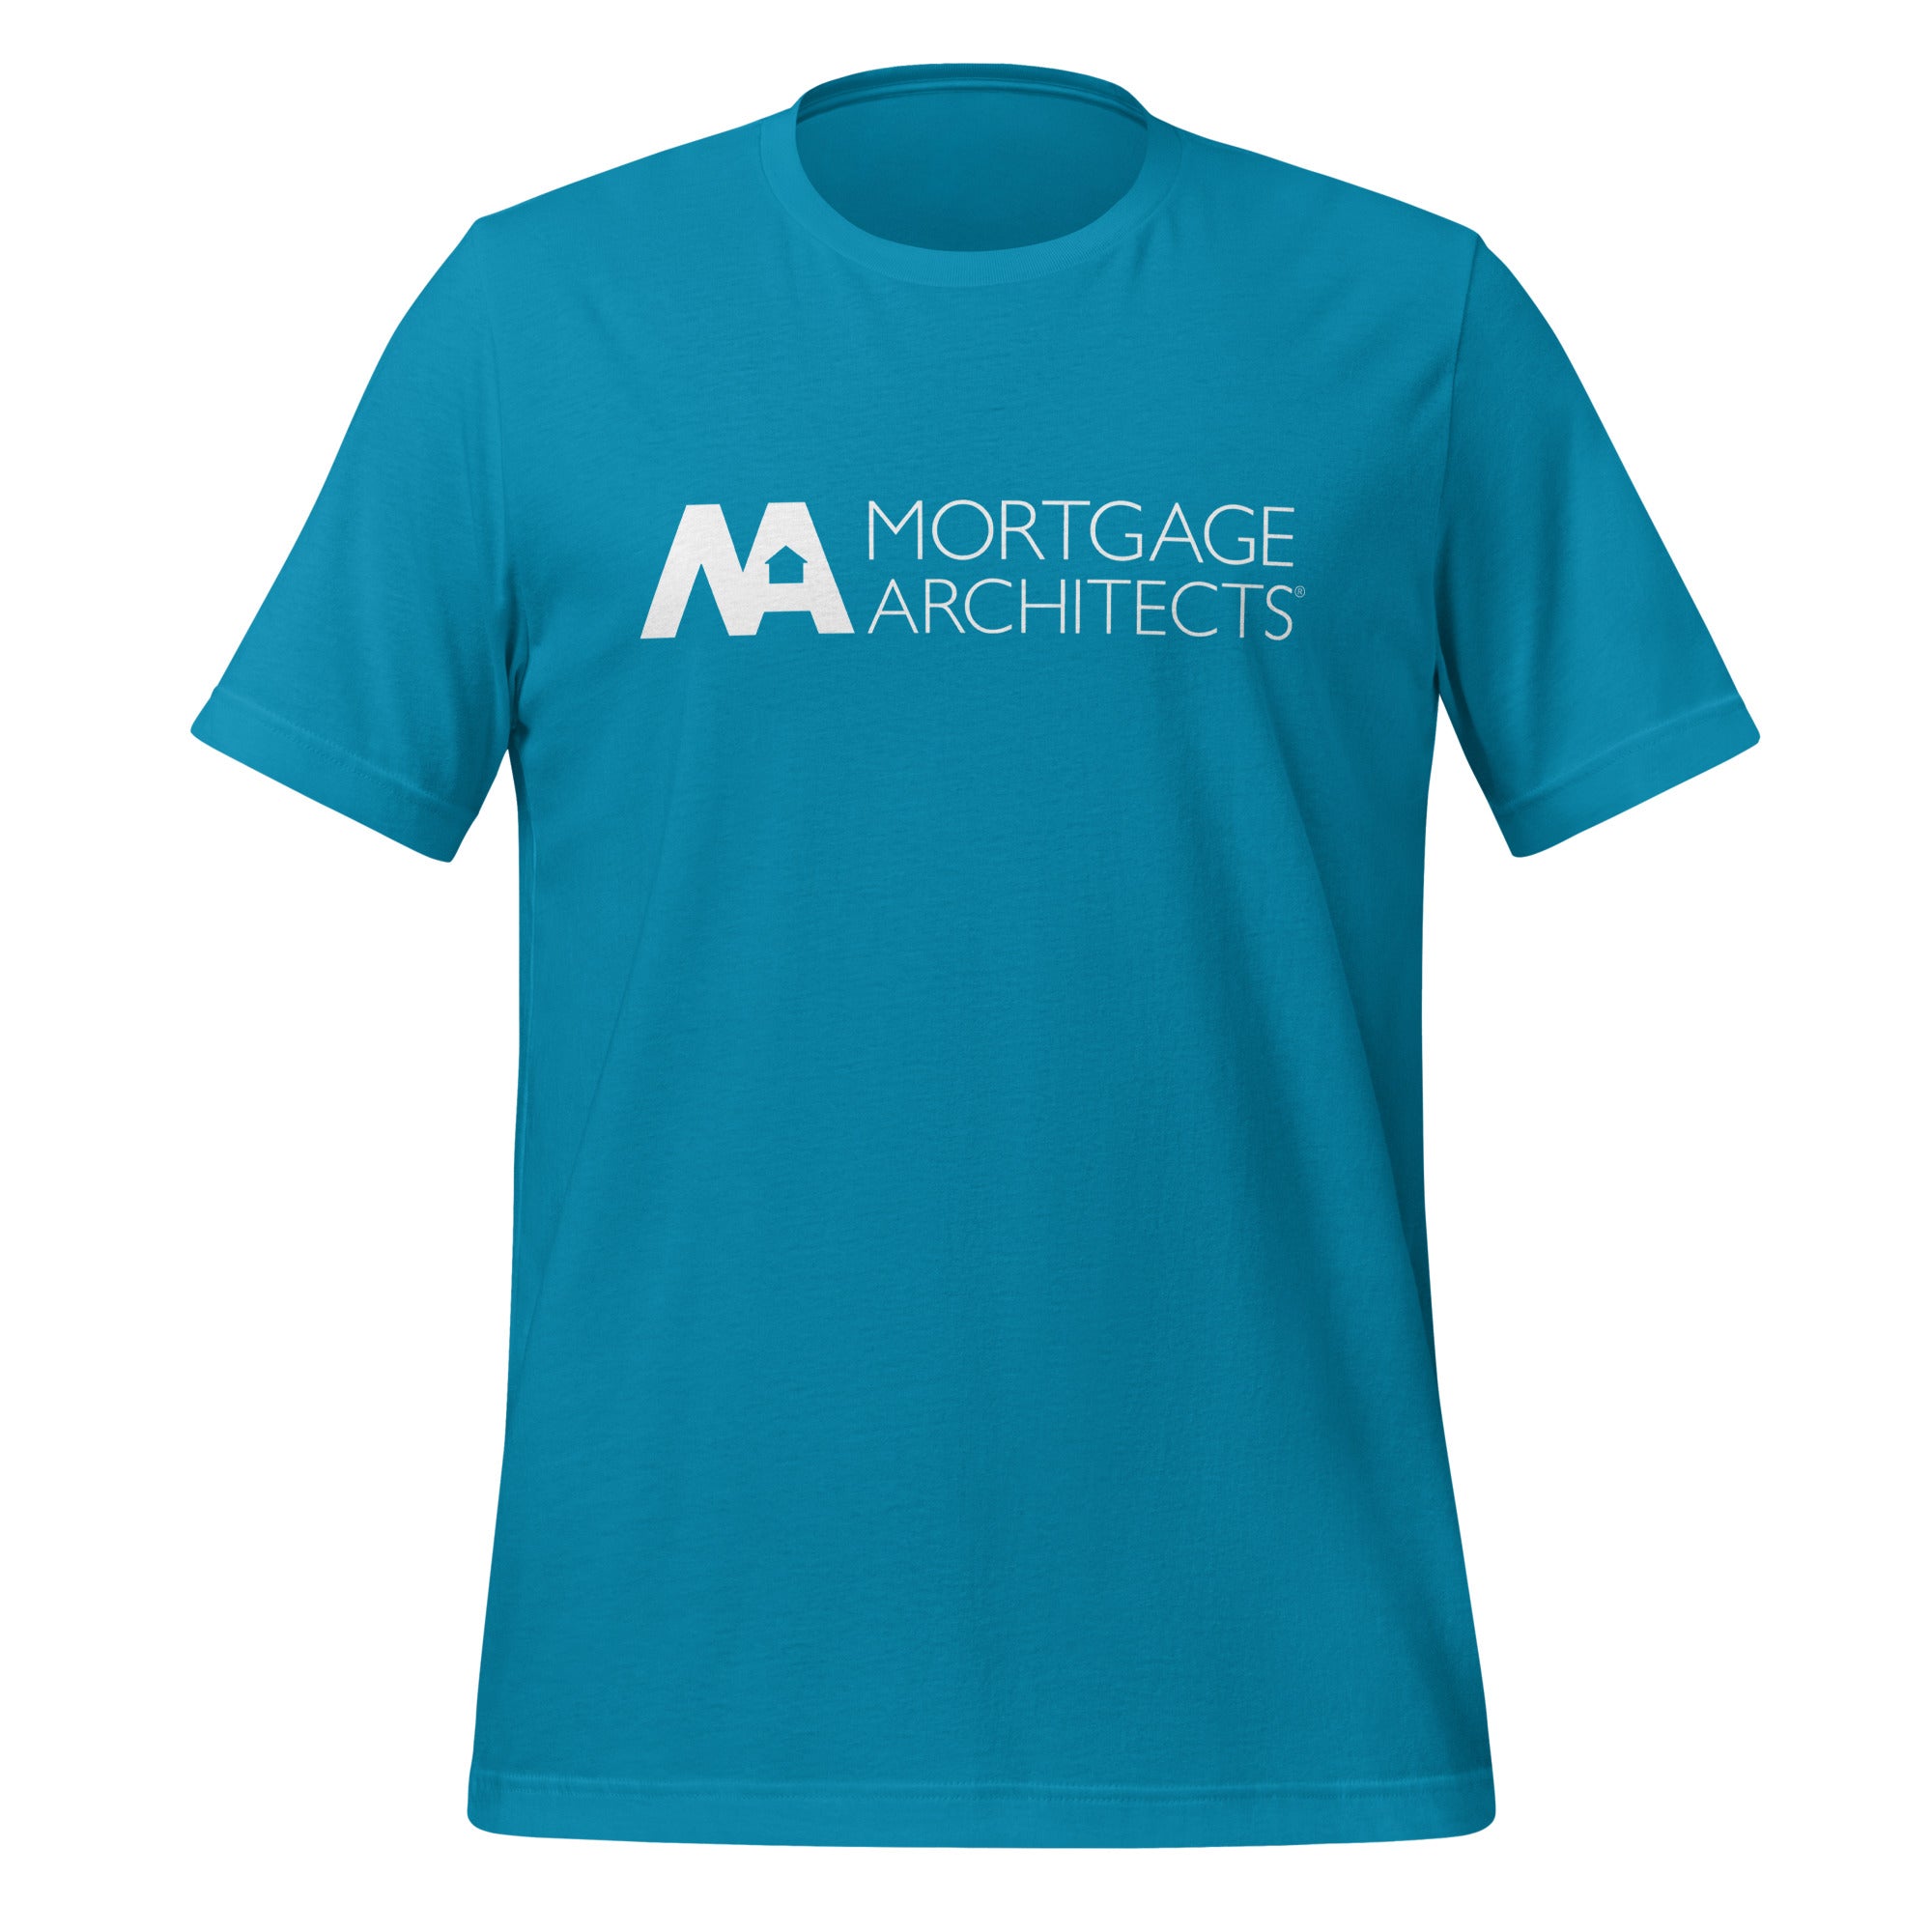 Mortgage Architects CozyBlend Tee